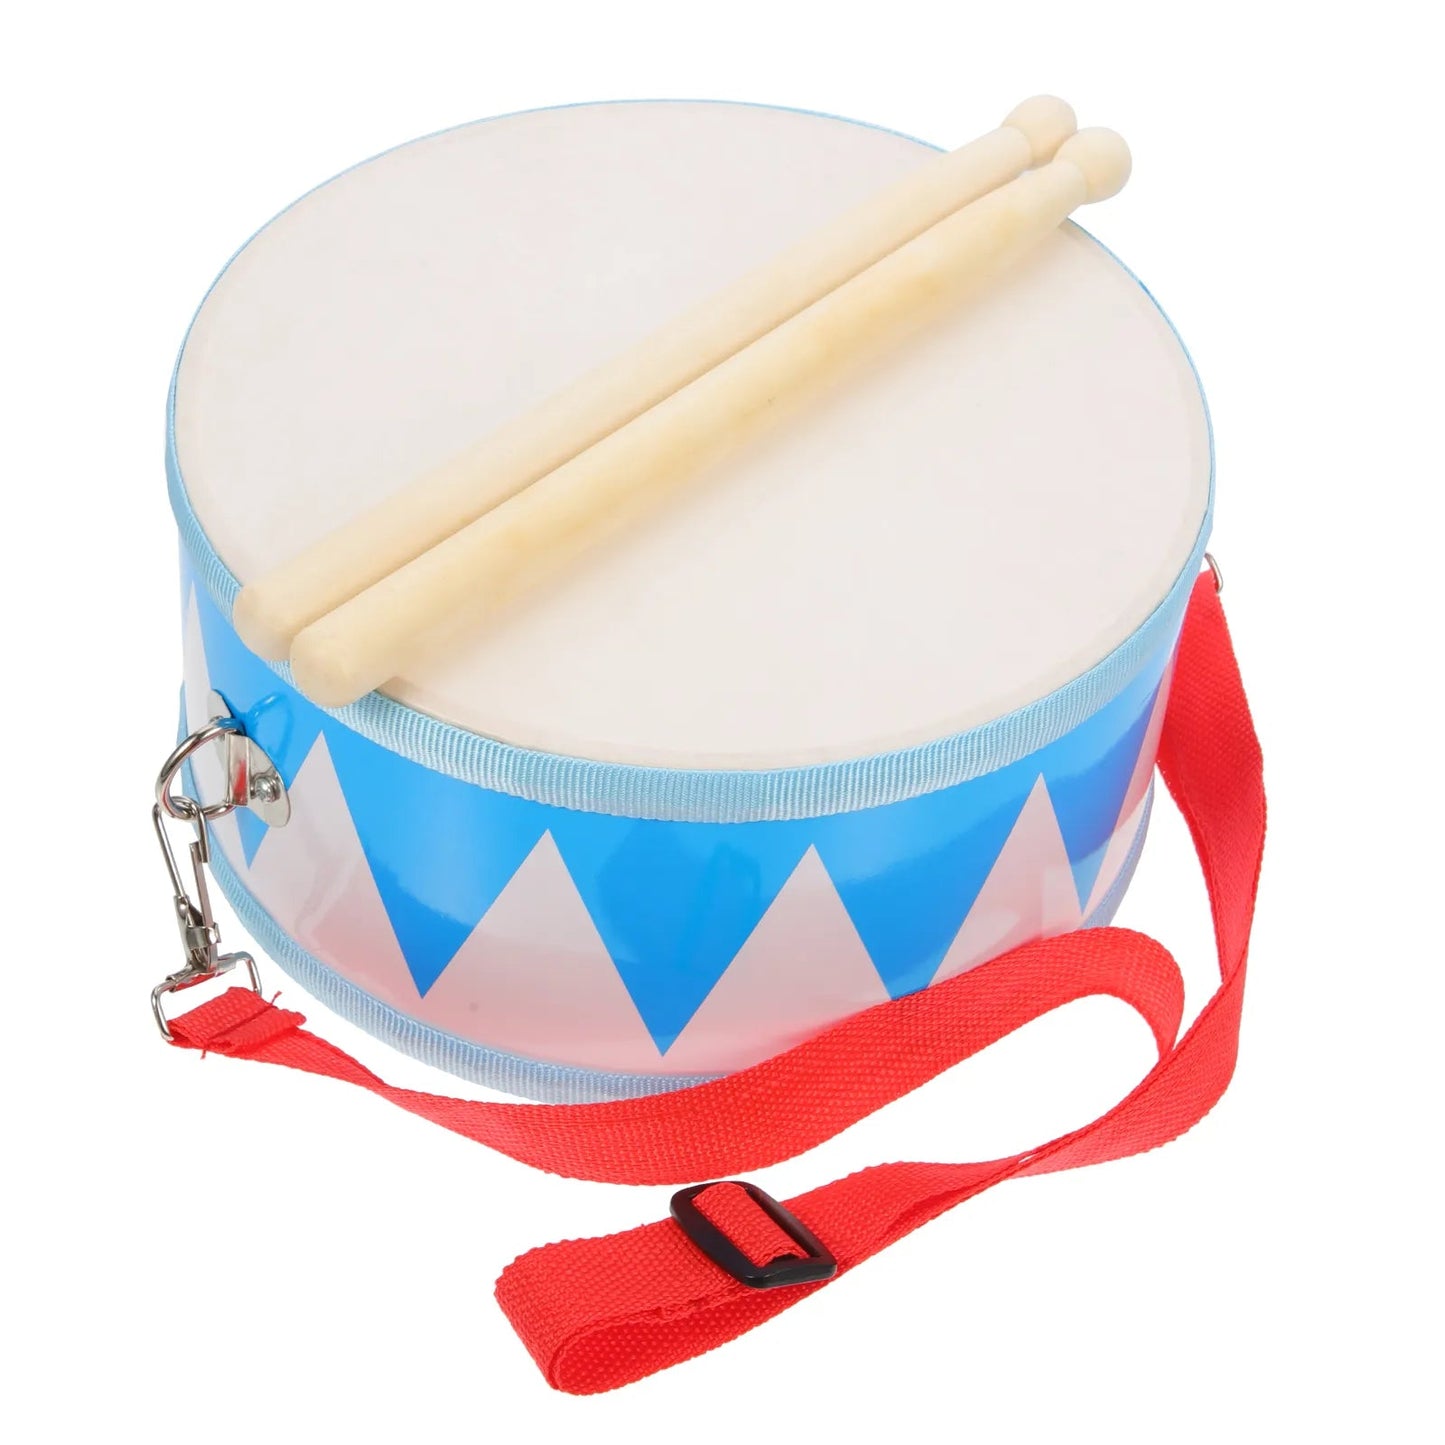 Percussion Drum Wooden Playset Music Instrument Teaching Aids Child